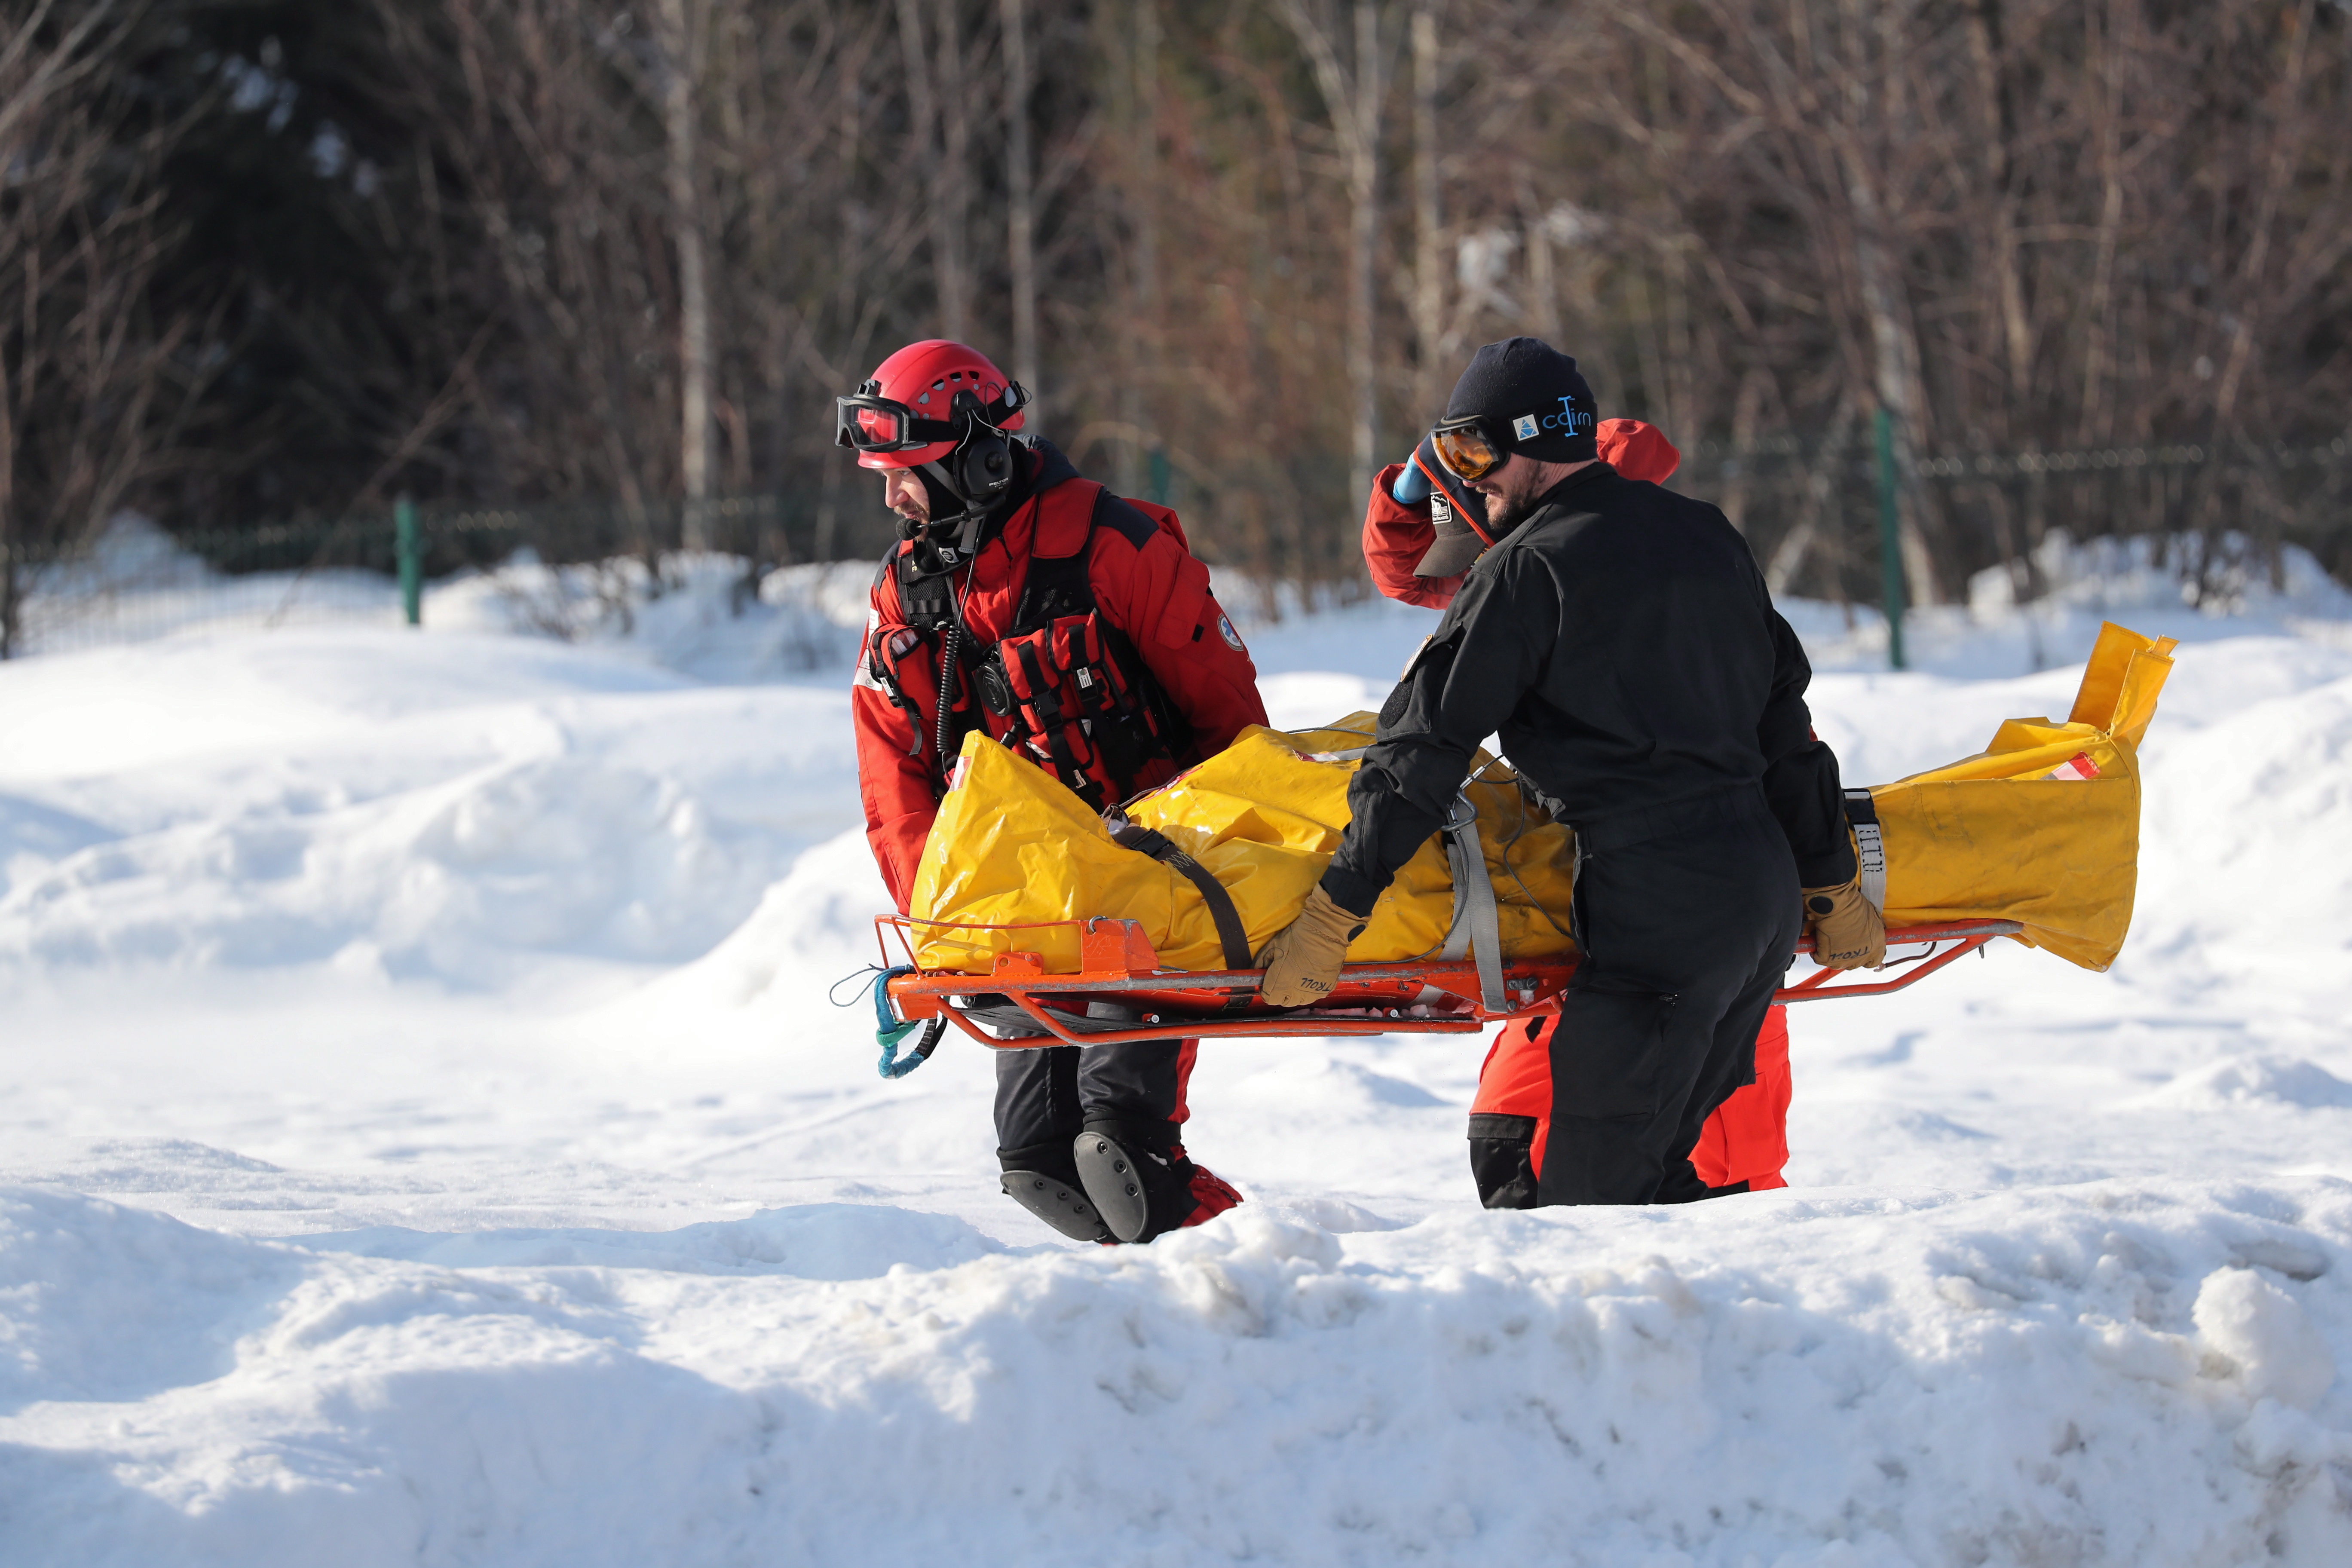 epa07331358 Medics transport an injured person to a helicopters of TOPR (Tatra Volunteer Rescue Service) which is flying to the hospital in Zakopane, Poland, 30 January 2019. Five people were injured after being hit by an avalanche, which descended from Rysy near Morskie Oko in the Tatra Mountains, on 30 January 2019. In the Tatras there is a moderate degree of avalanche danger.  EPA/Grzegorz Momot POLAND OUT